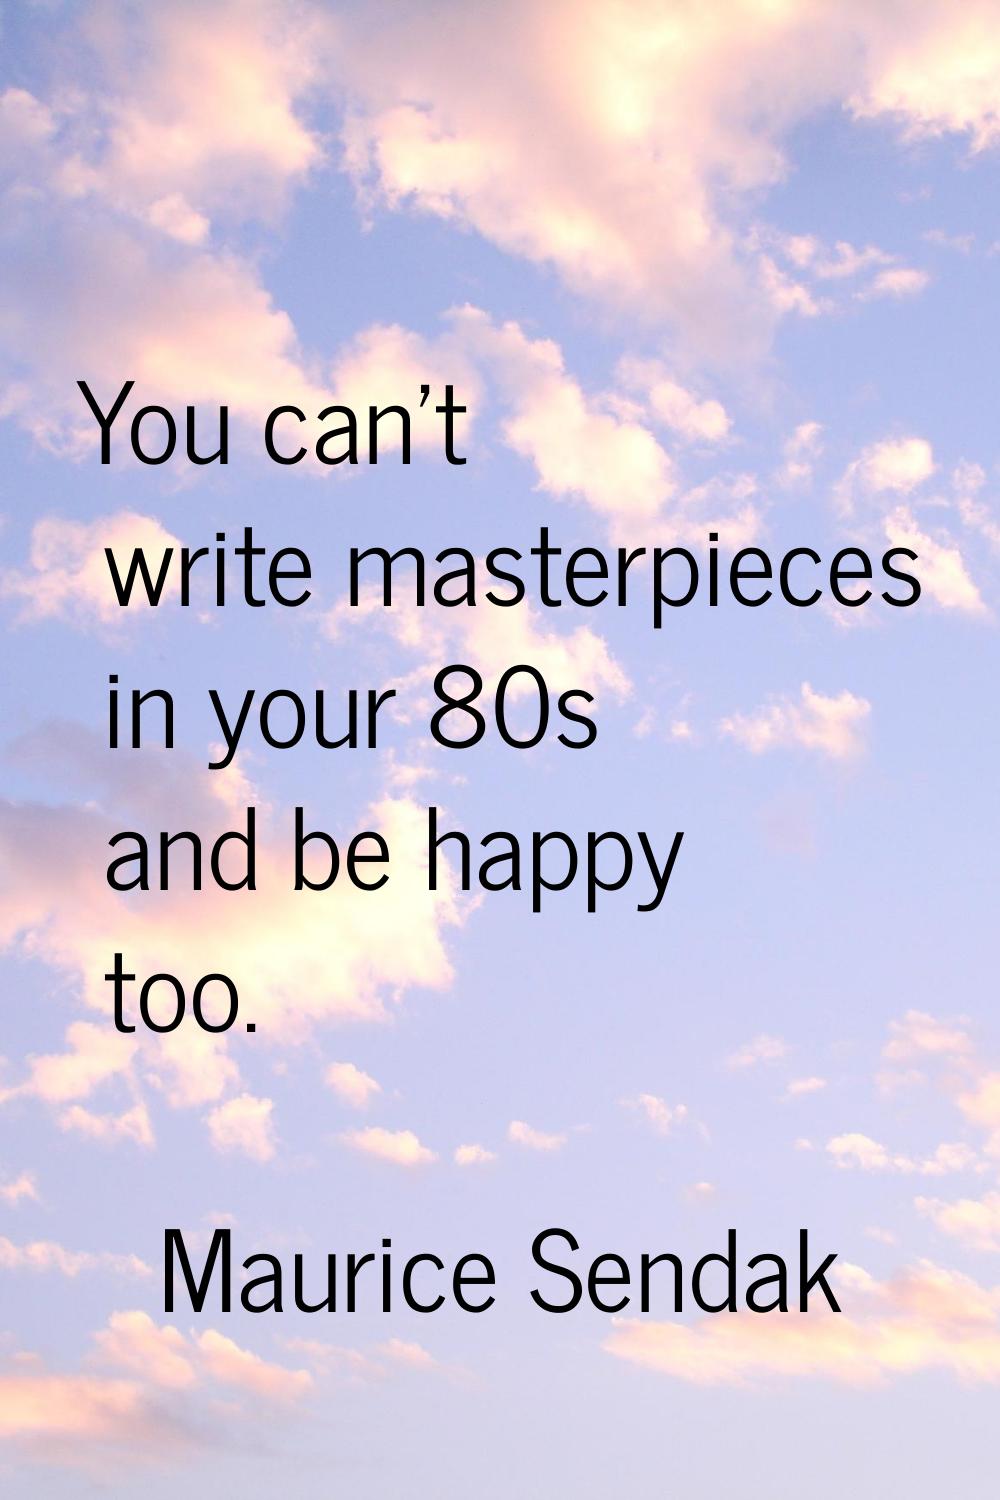 You can't write masterpieces in your 80s and be happy too.